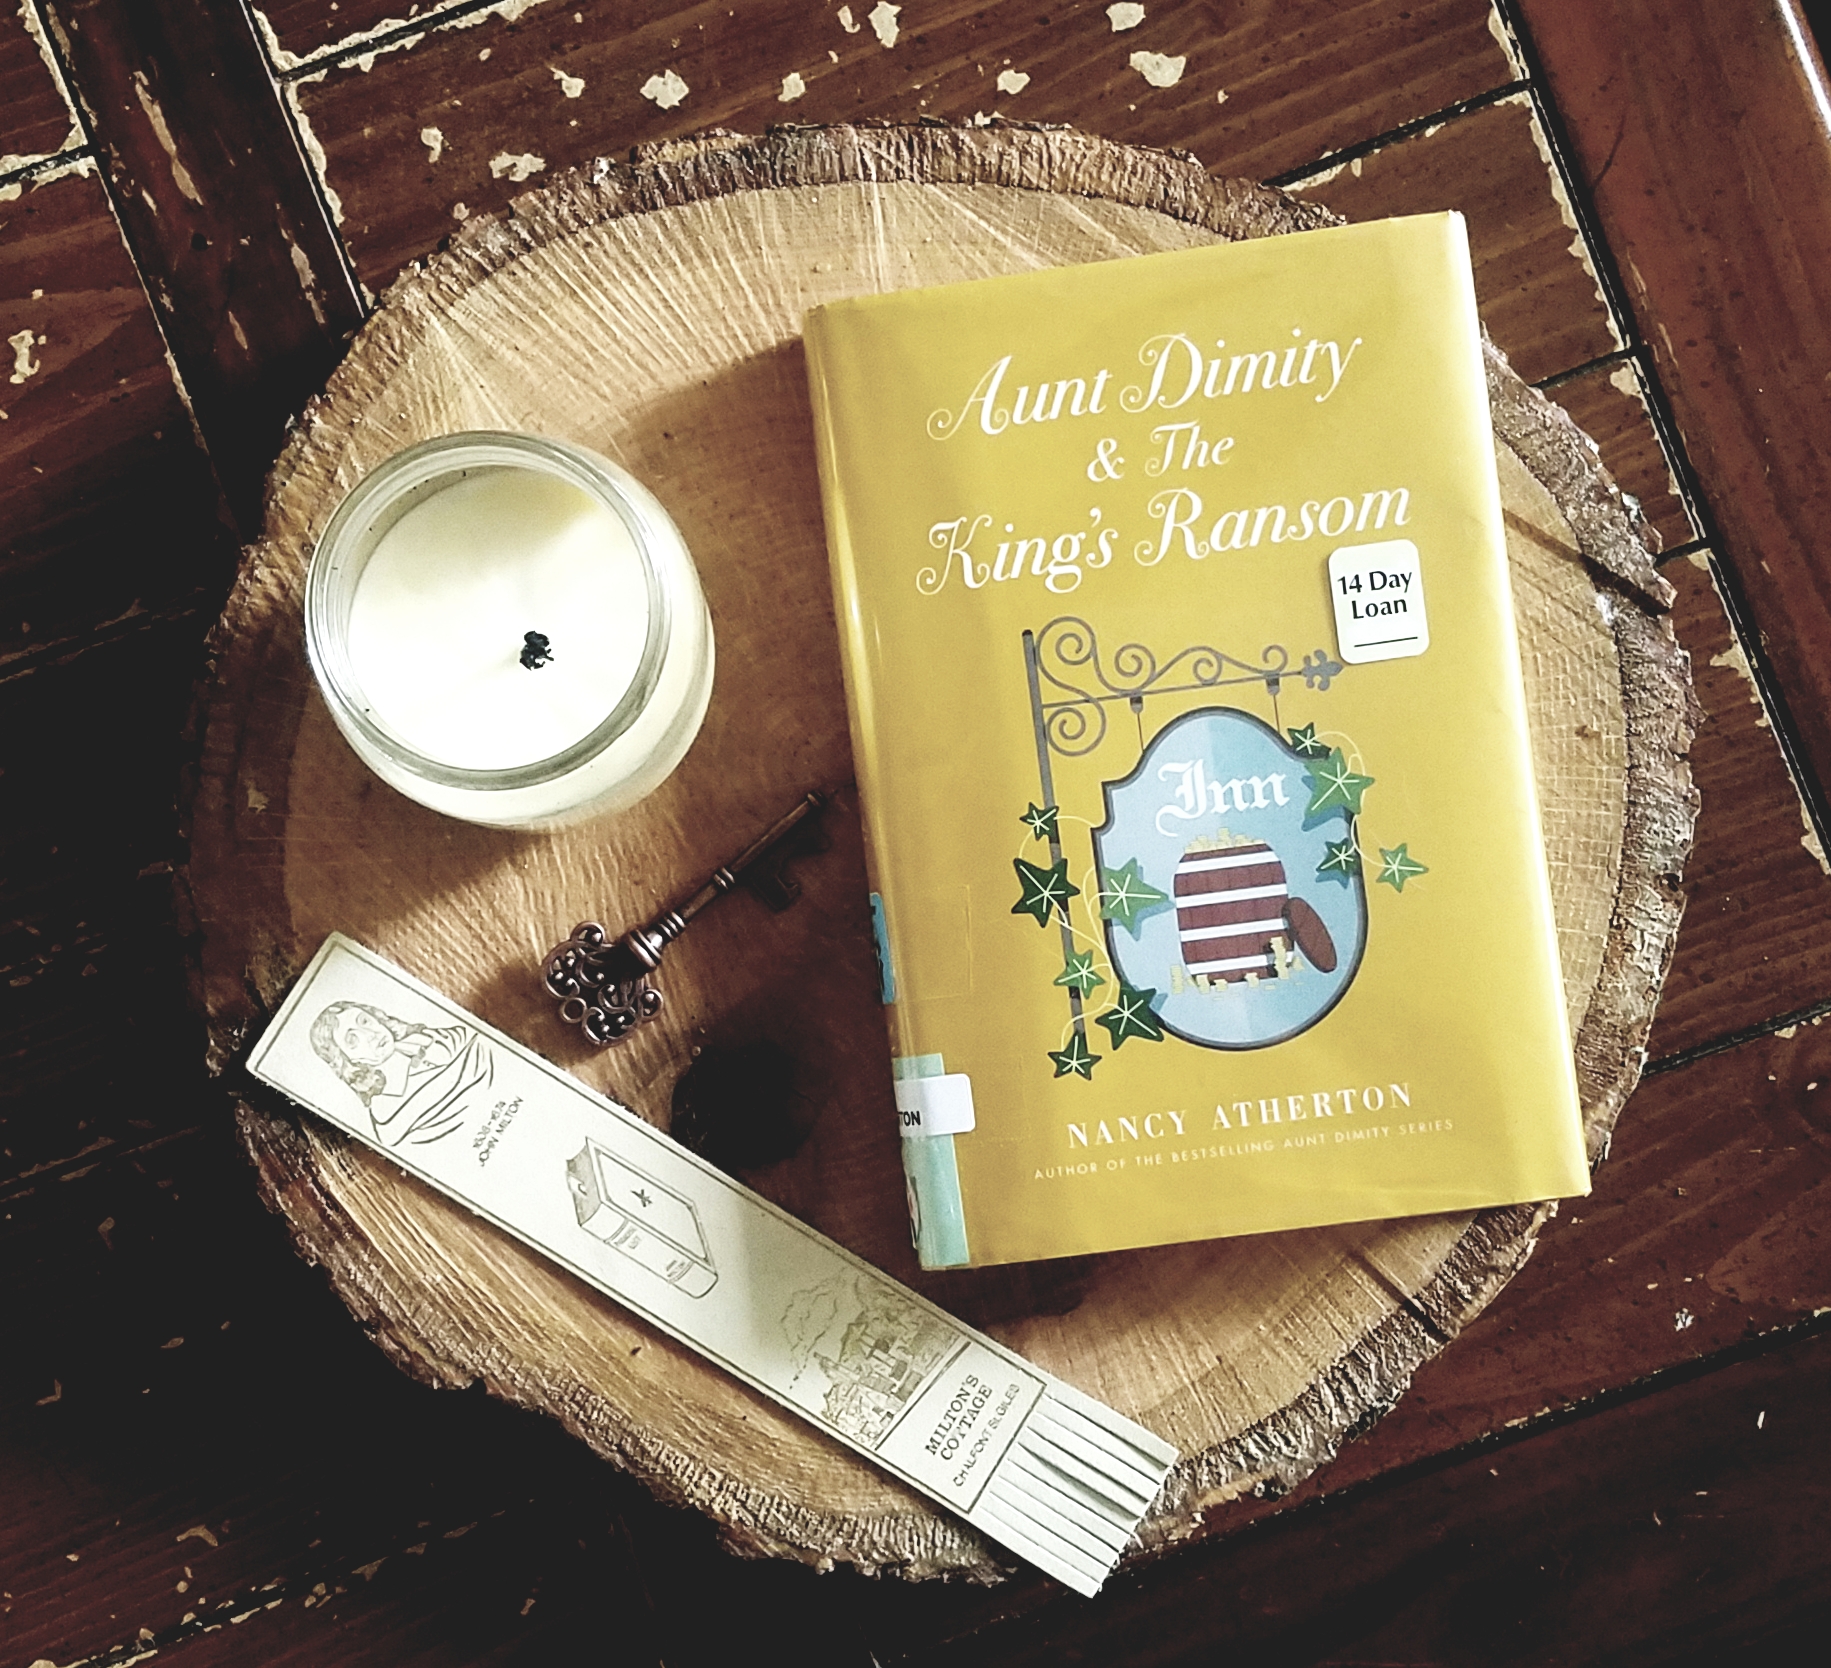 Book Review of AUNT DIMITY AND THE KING’S RANSOM